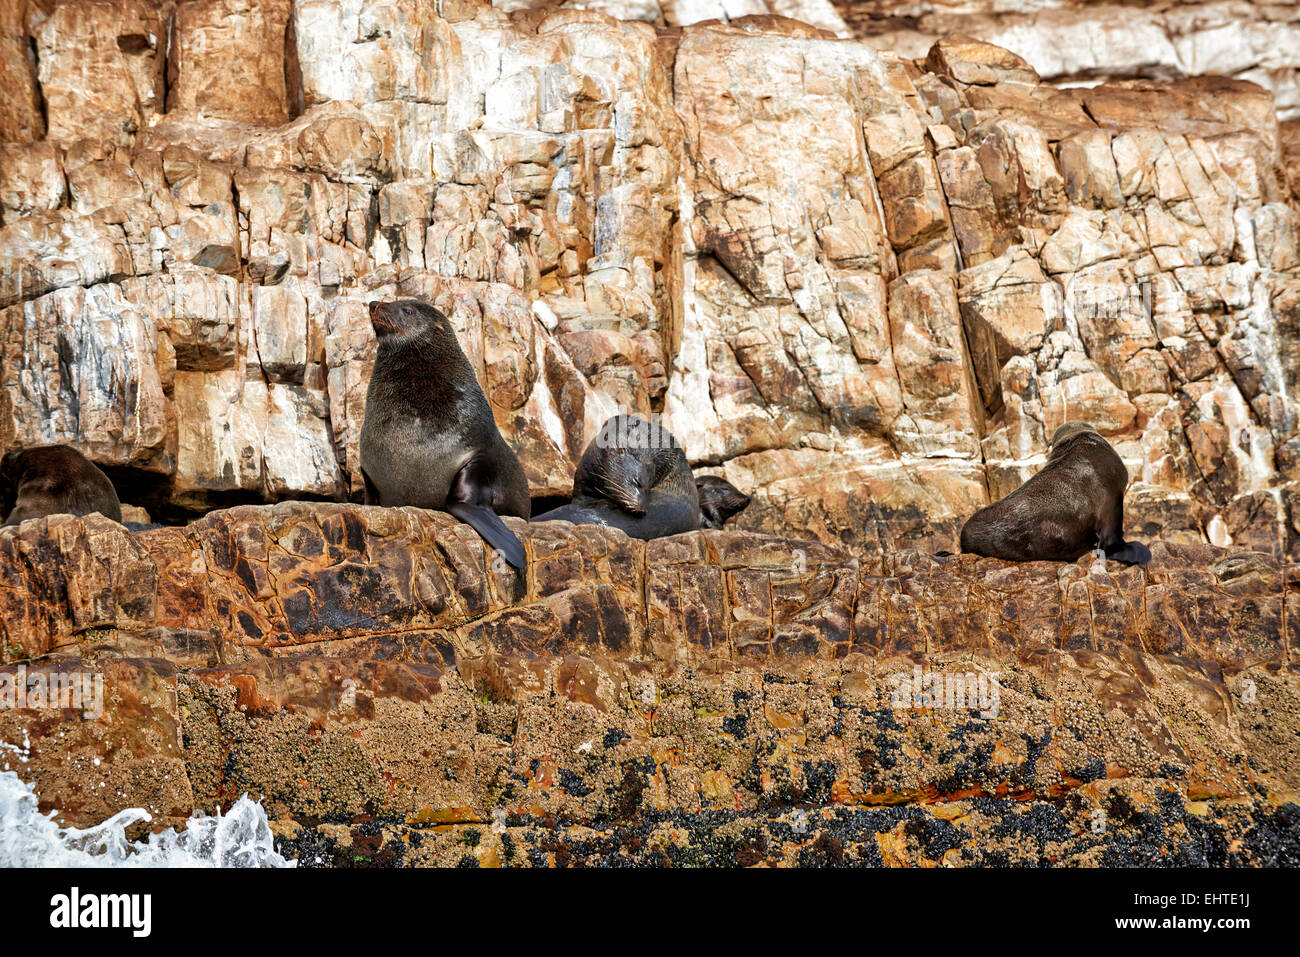 Colony of brown fur seal (Arctocephalus pusillus) in front of Plettenberg Bay, Western Cape, South Africa Stock Photo